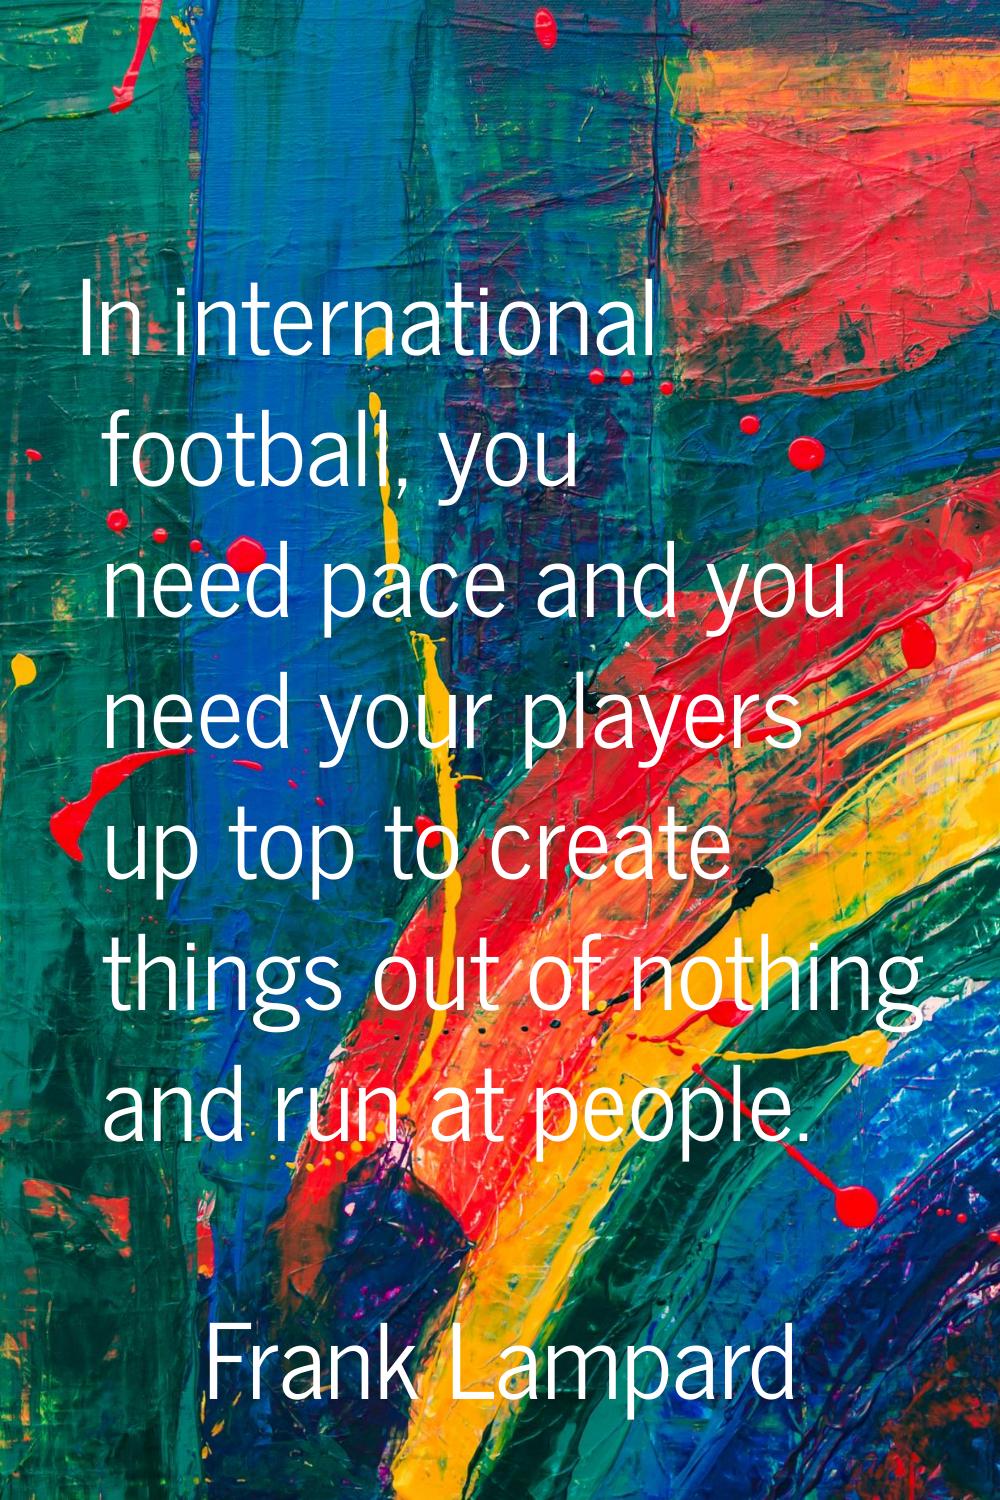 In international football, you need pace and you need your players up top to create things out of n